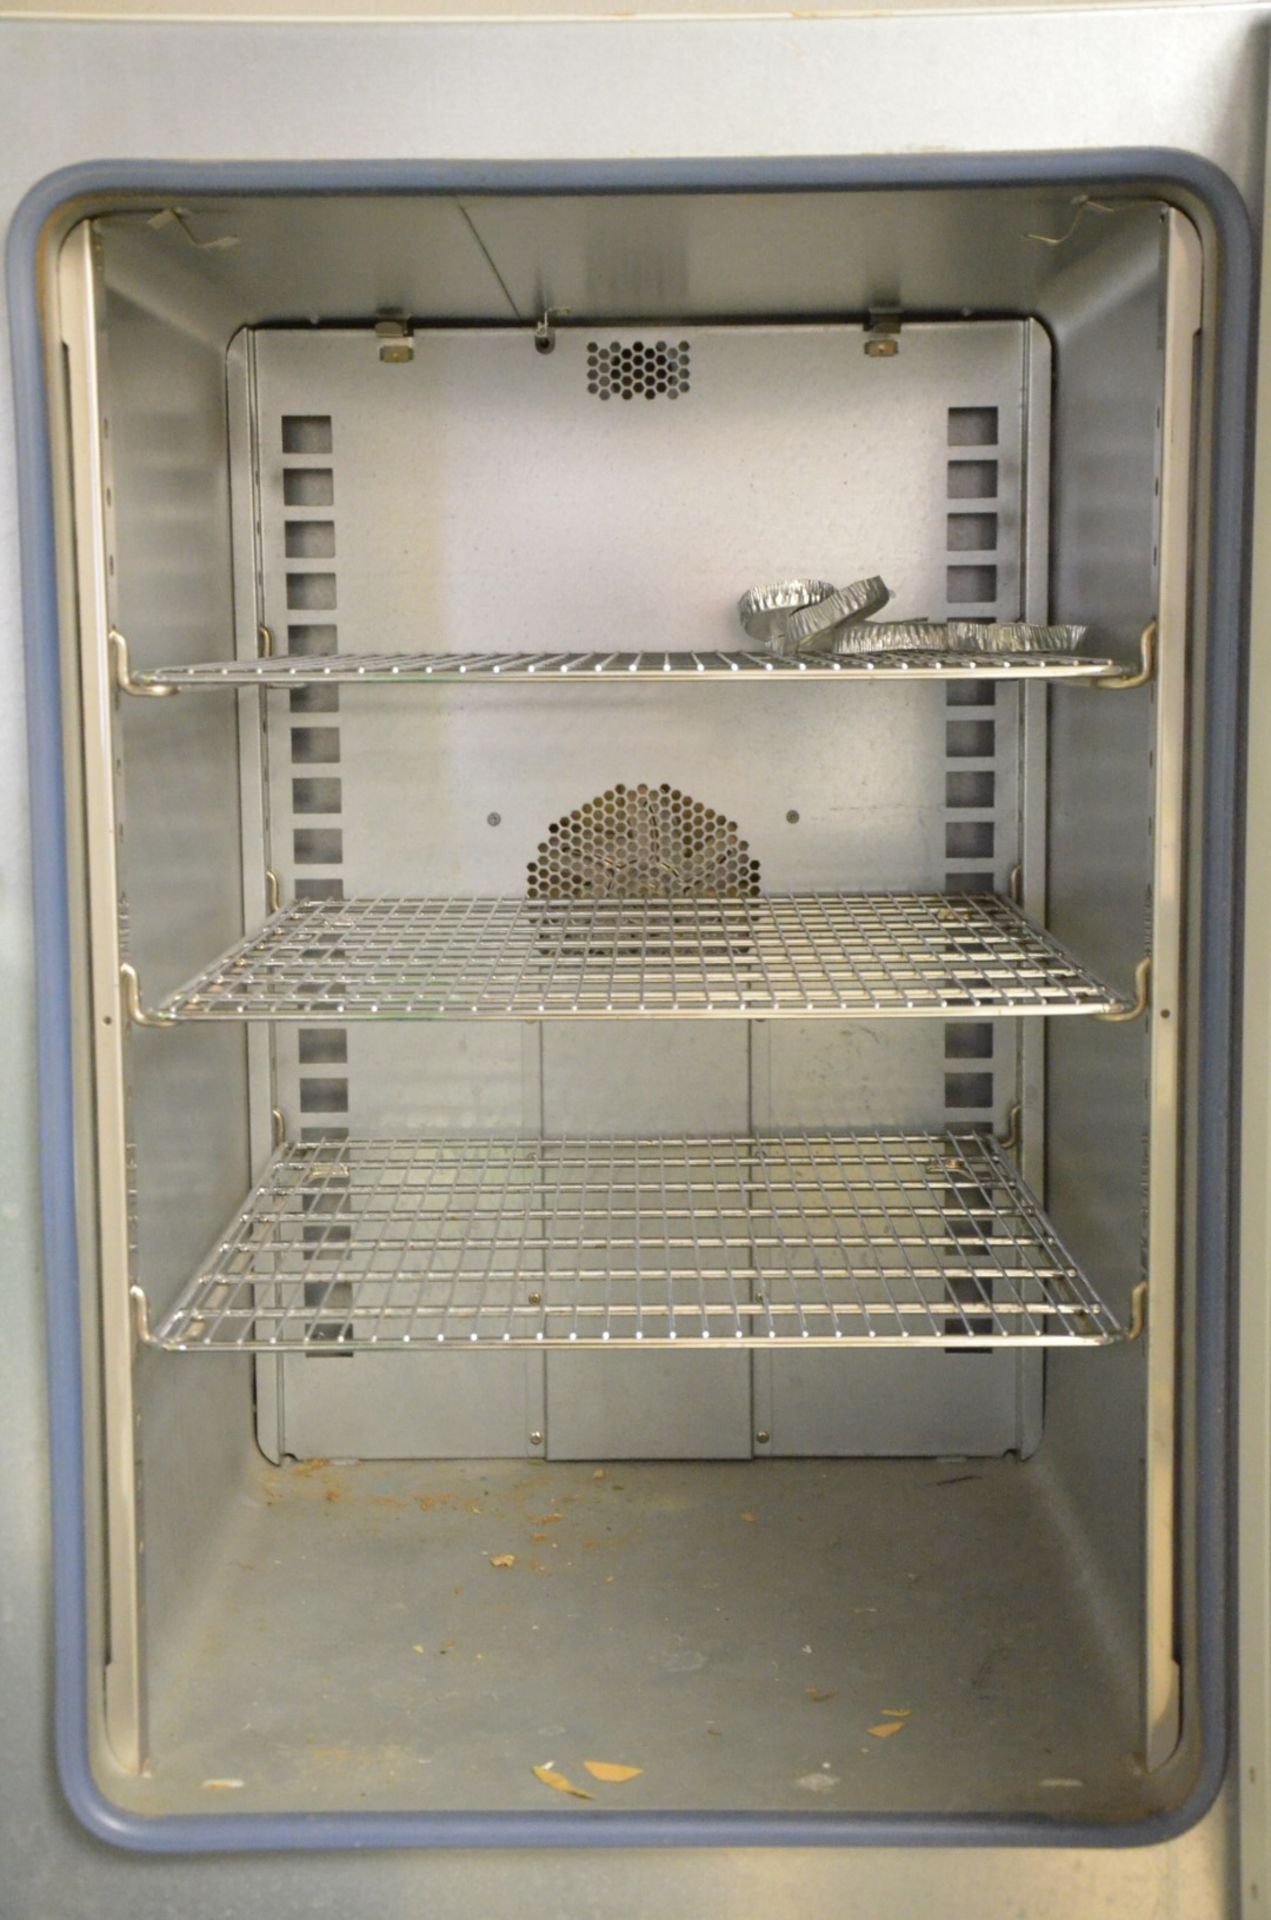 THERMO SCIENTIFIC (2013) HERATHERM OMS180 DIGITAL BENCH TOP LAB OVEN WITH DIGITAL MICROPROCESSOR - Image 5 of 9